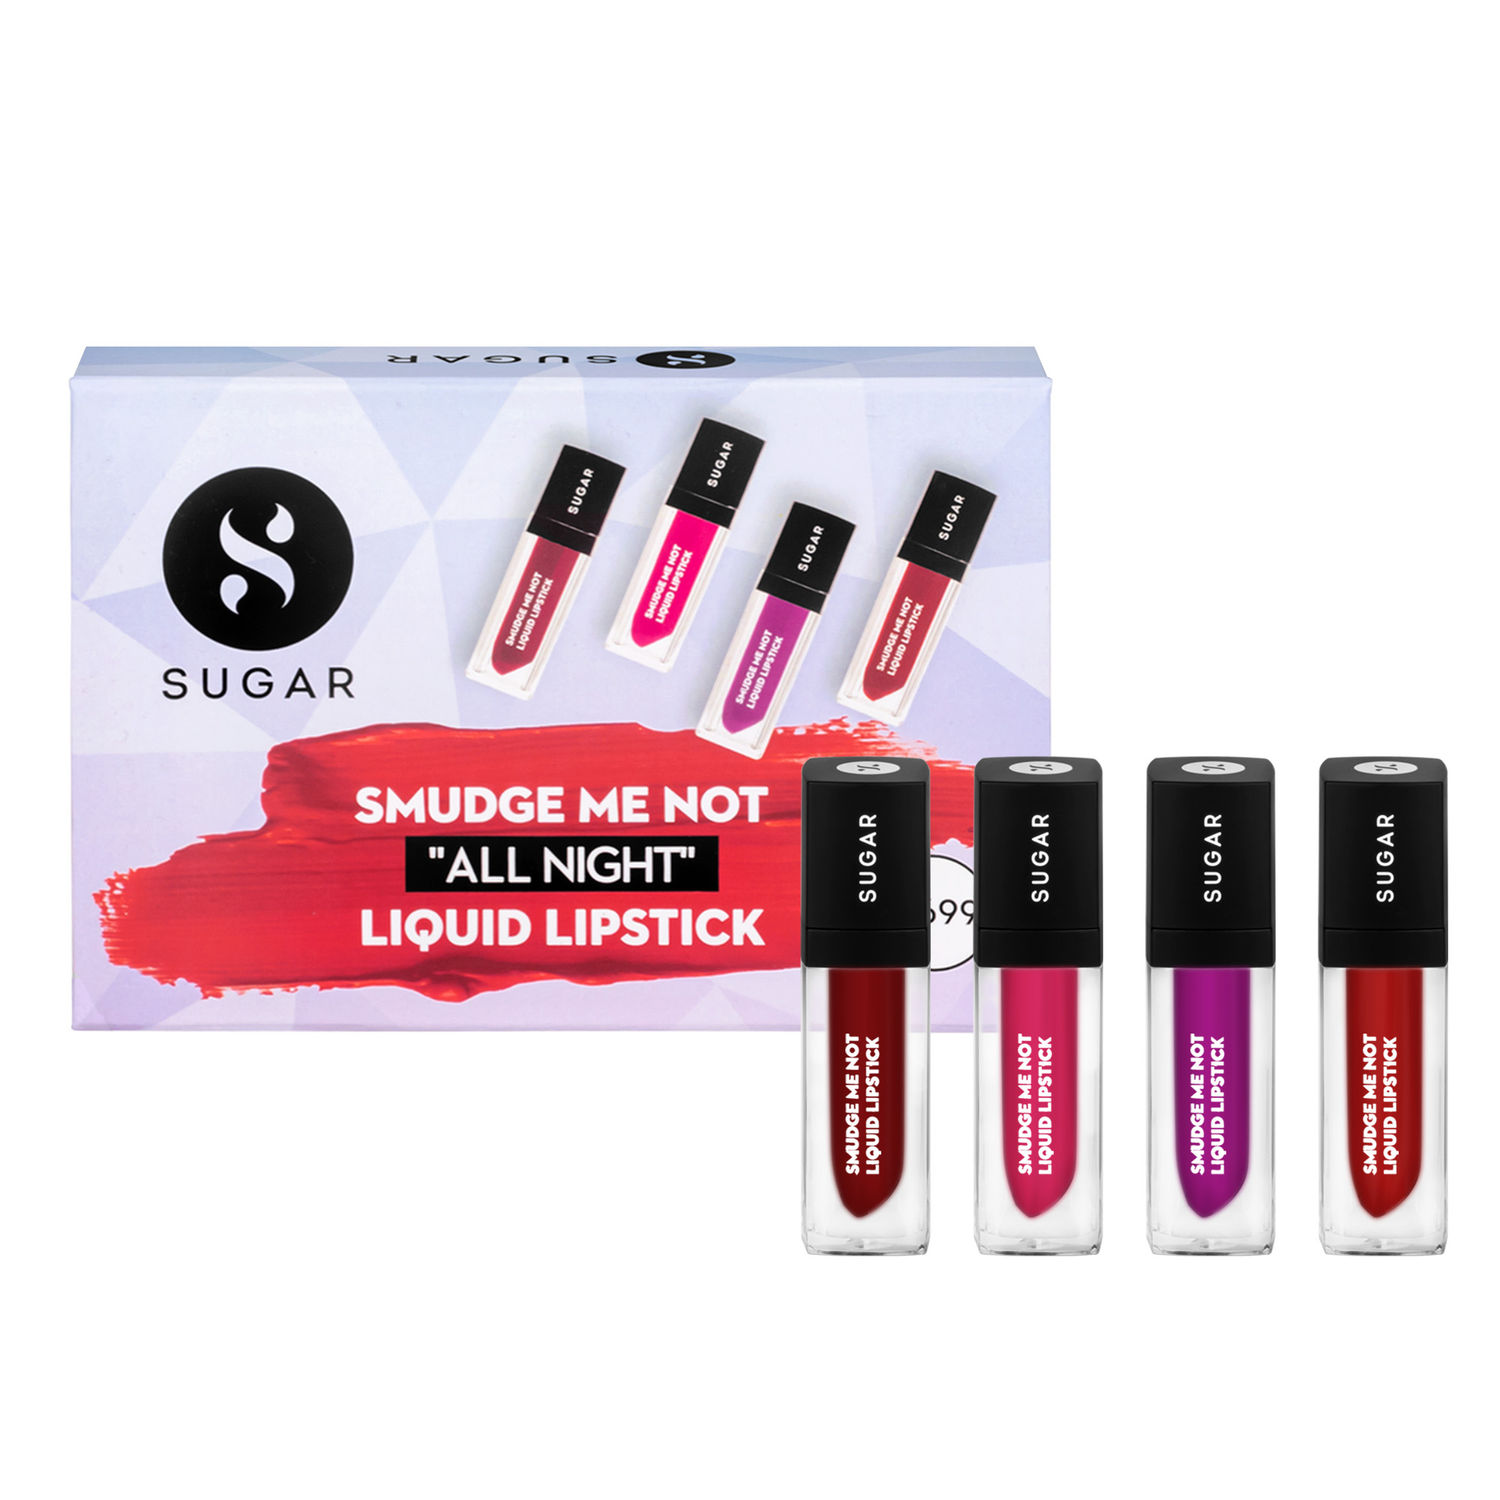 Buy SUGAR Cosmetics Smudge Me Not"All Night" Liquid Lipstick | Ultra Matte Liquid Lipstick, Transferproof and Waterproof, Lasts Up to 12hrs | Pack of 4 - Purplle